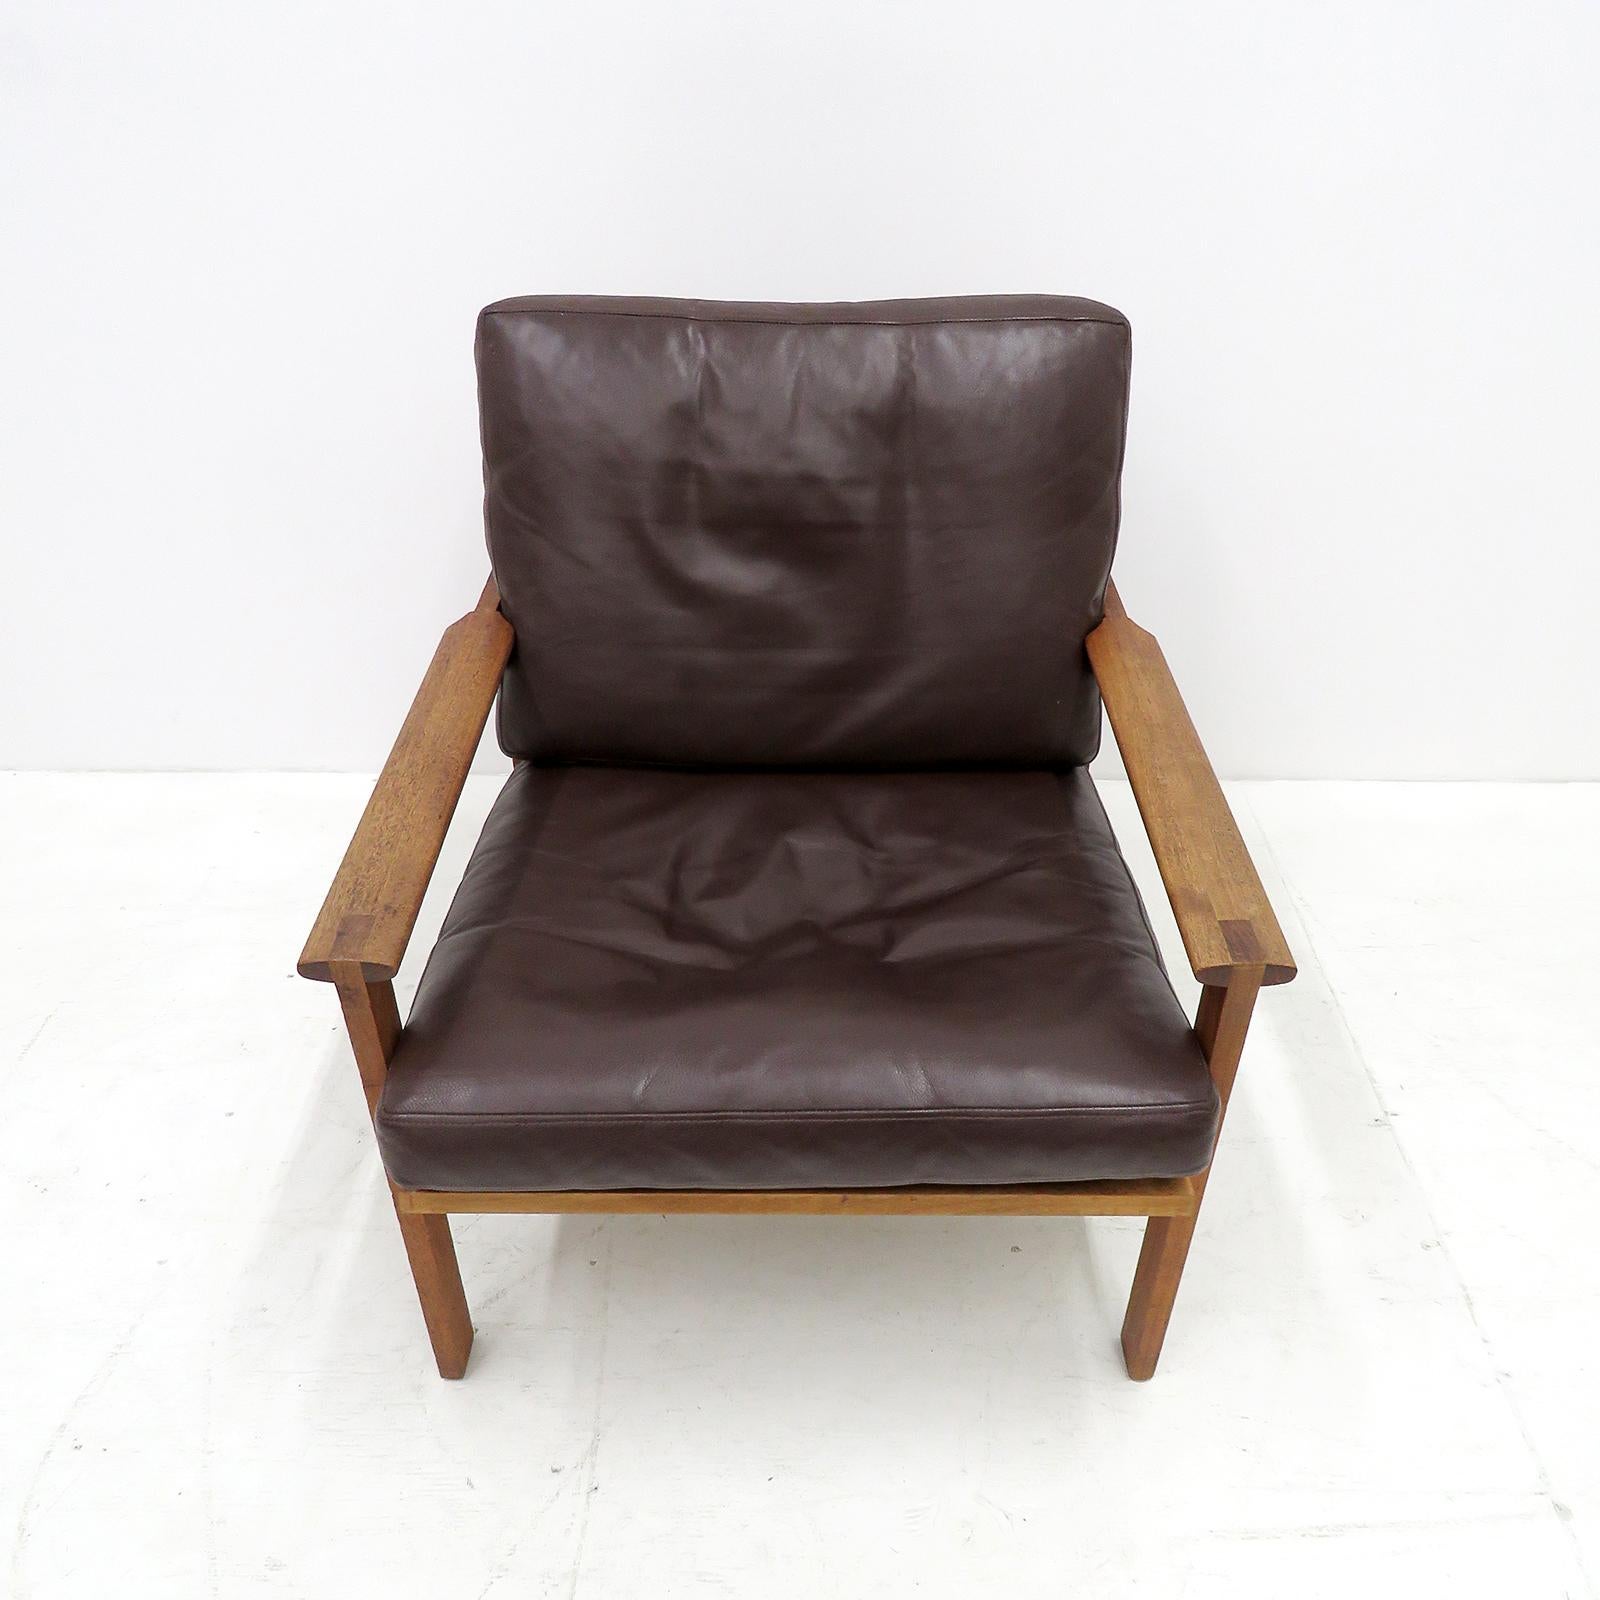 Remarkable pair of easy chairs from the Capella series, designed by Illum Wikkelsø, produced by Niels Eilersen in Denmark, designed in 1959, solid teak wood frames with loose cushions in original dark brown leather with minor normal traces of wear.